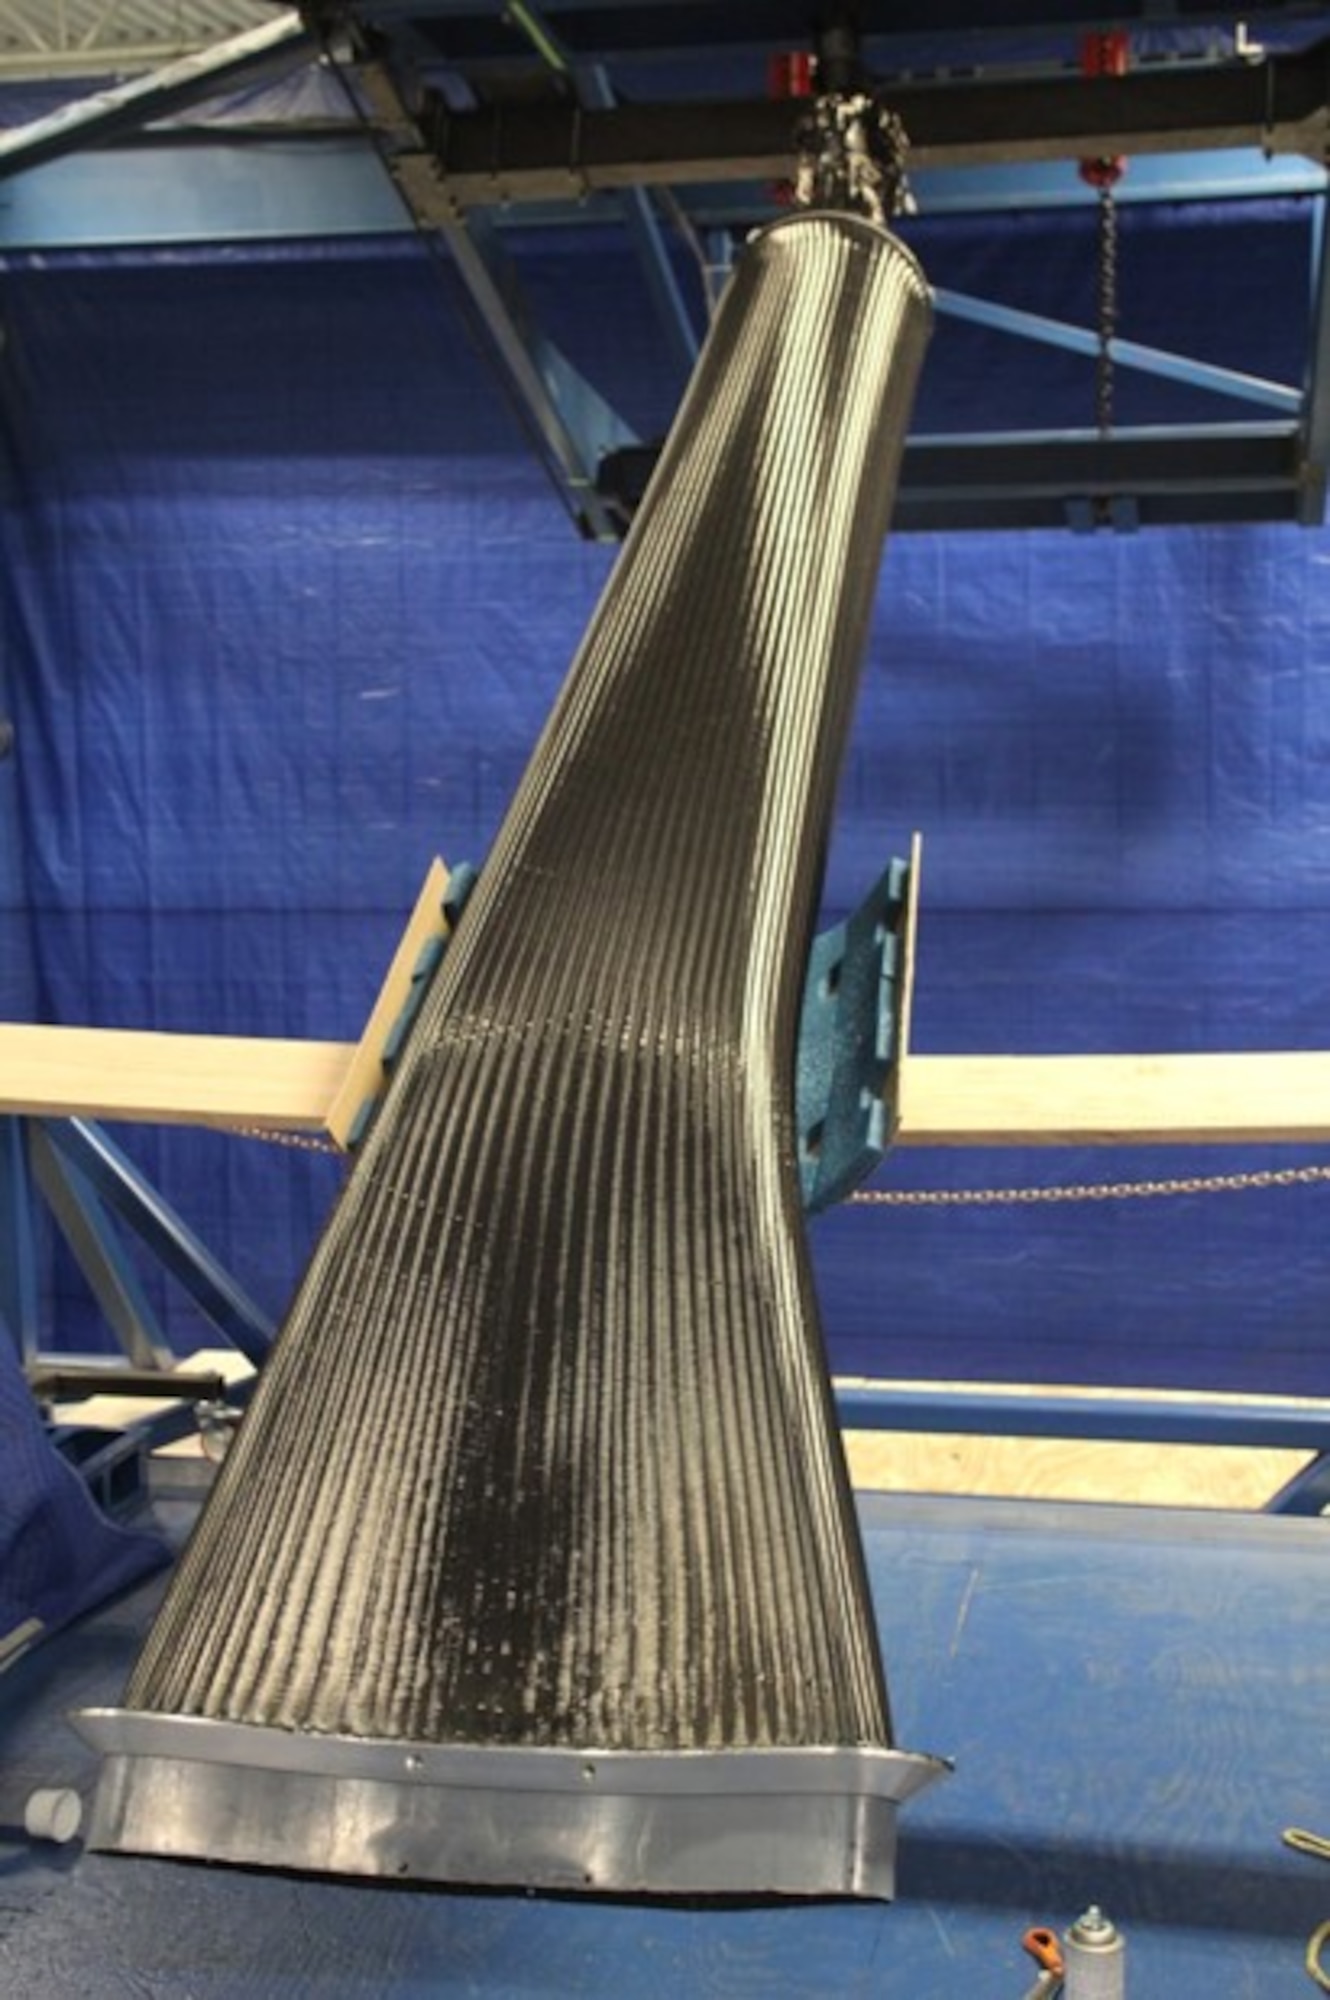 An 11-foot long unmanned aircraft system inlet duct preform is shown prior to resin infusion. (Courtesy photo)